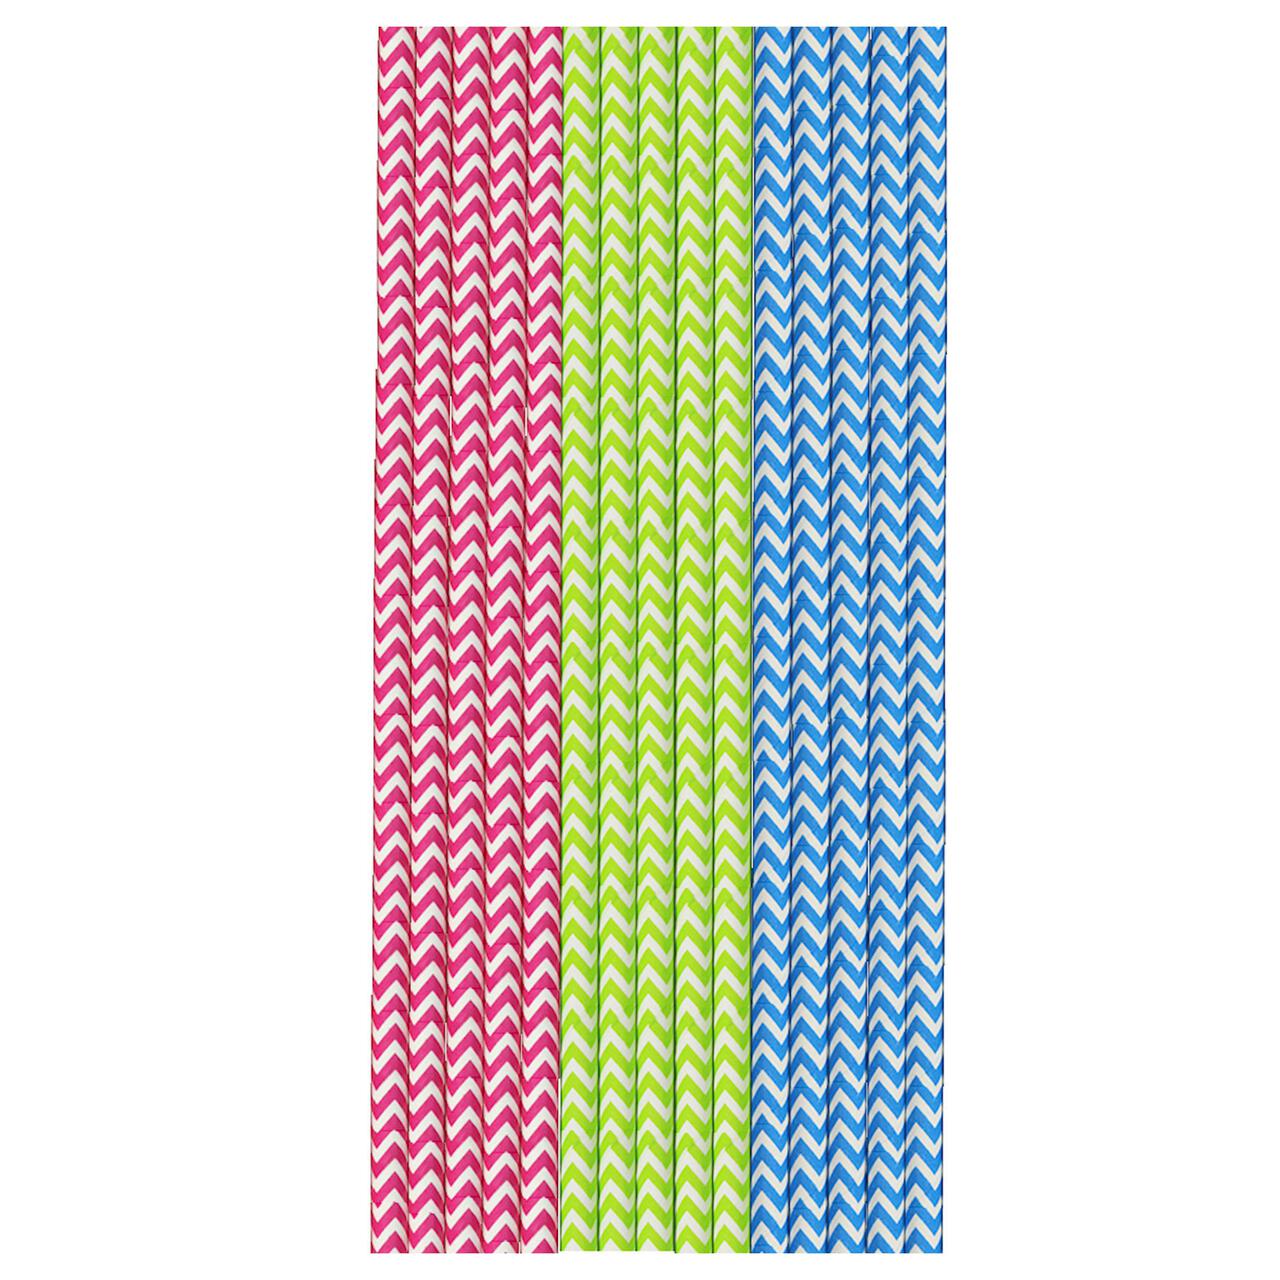 Party Recyclable Paper Straws 50 per pack